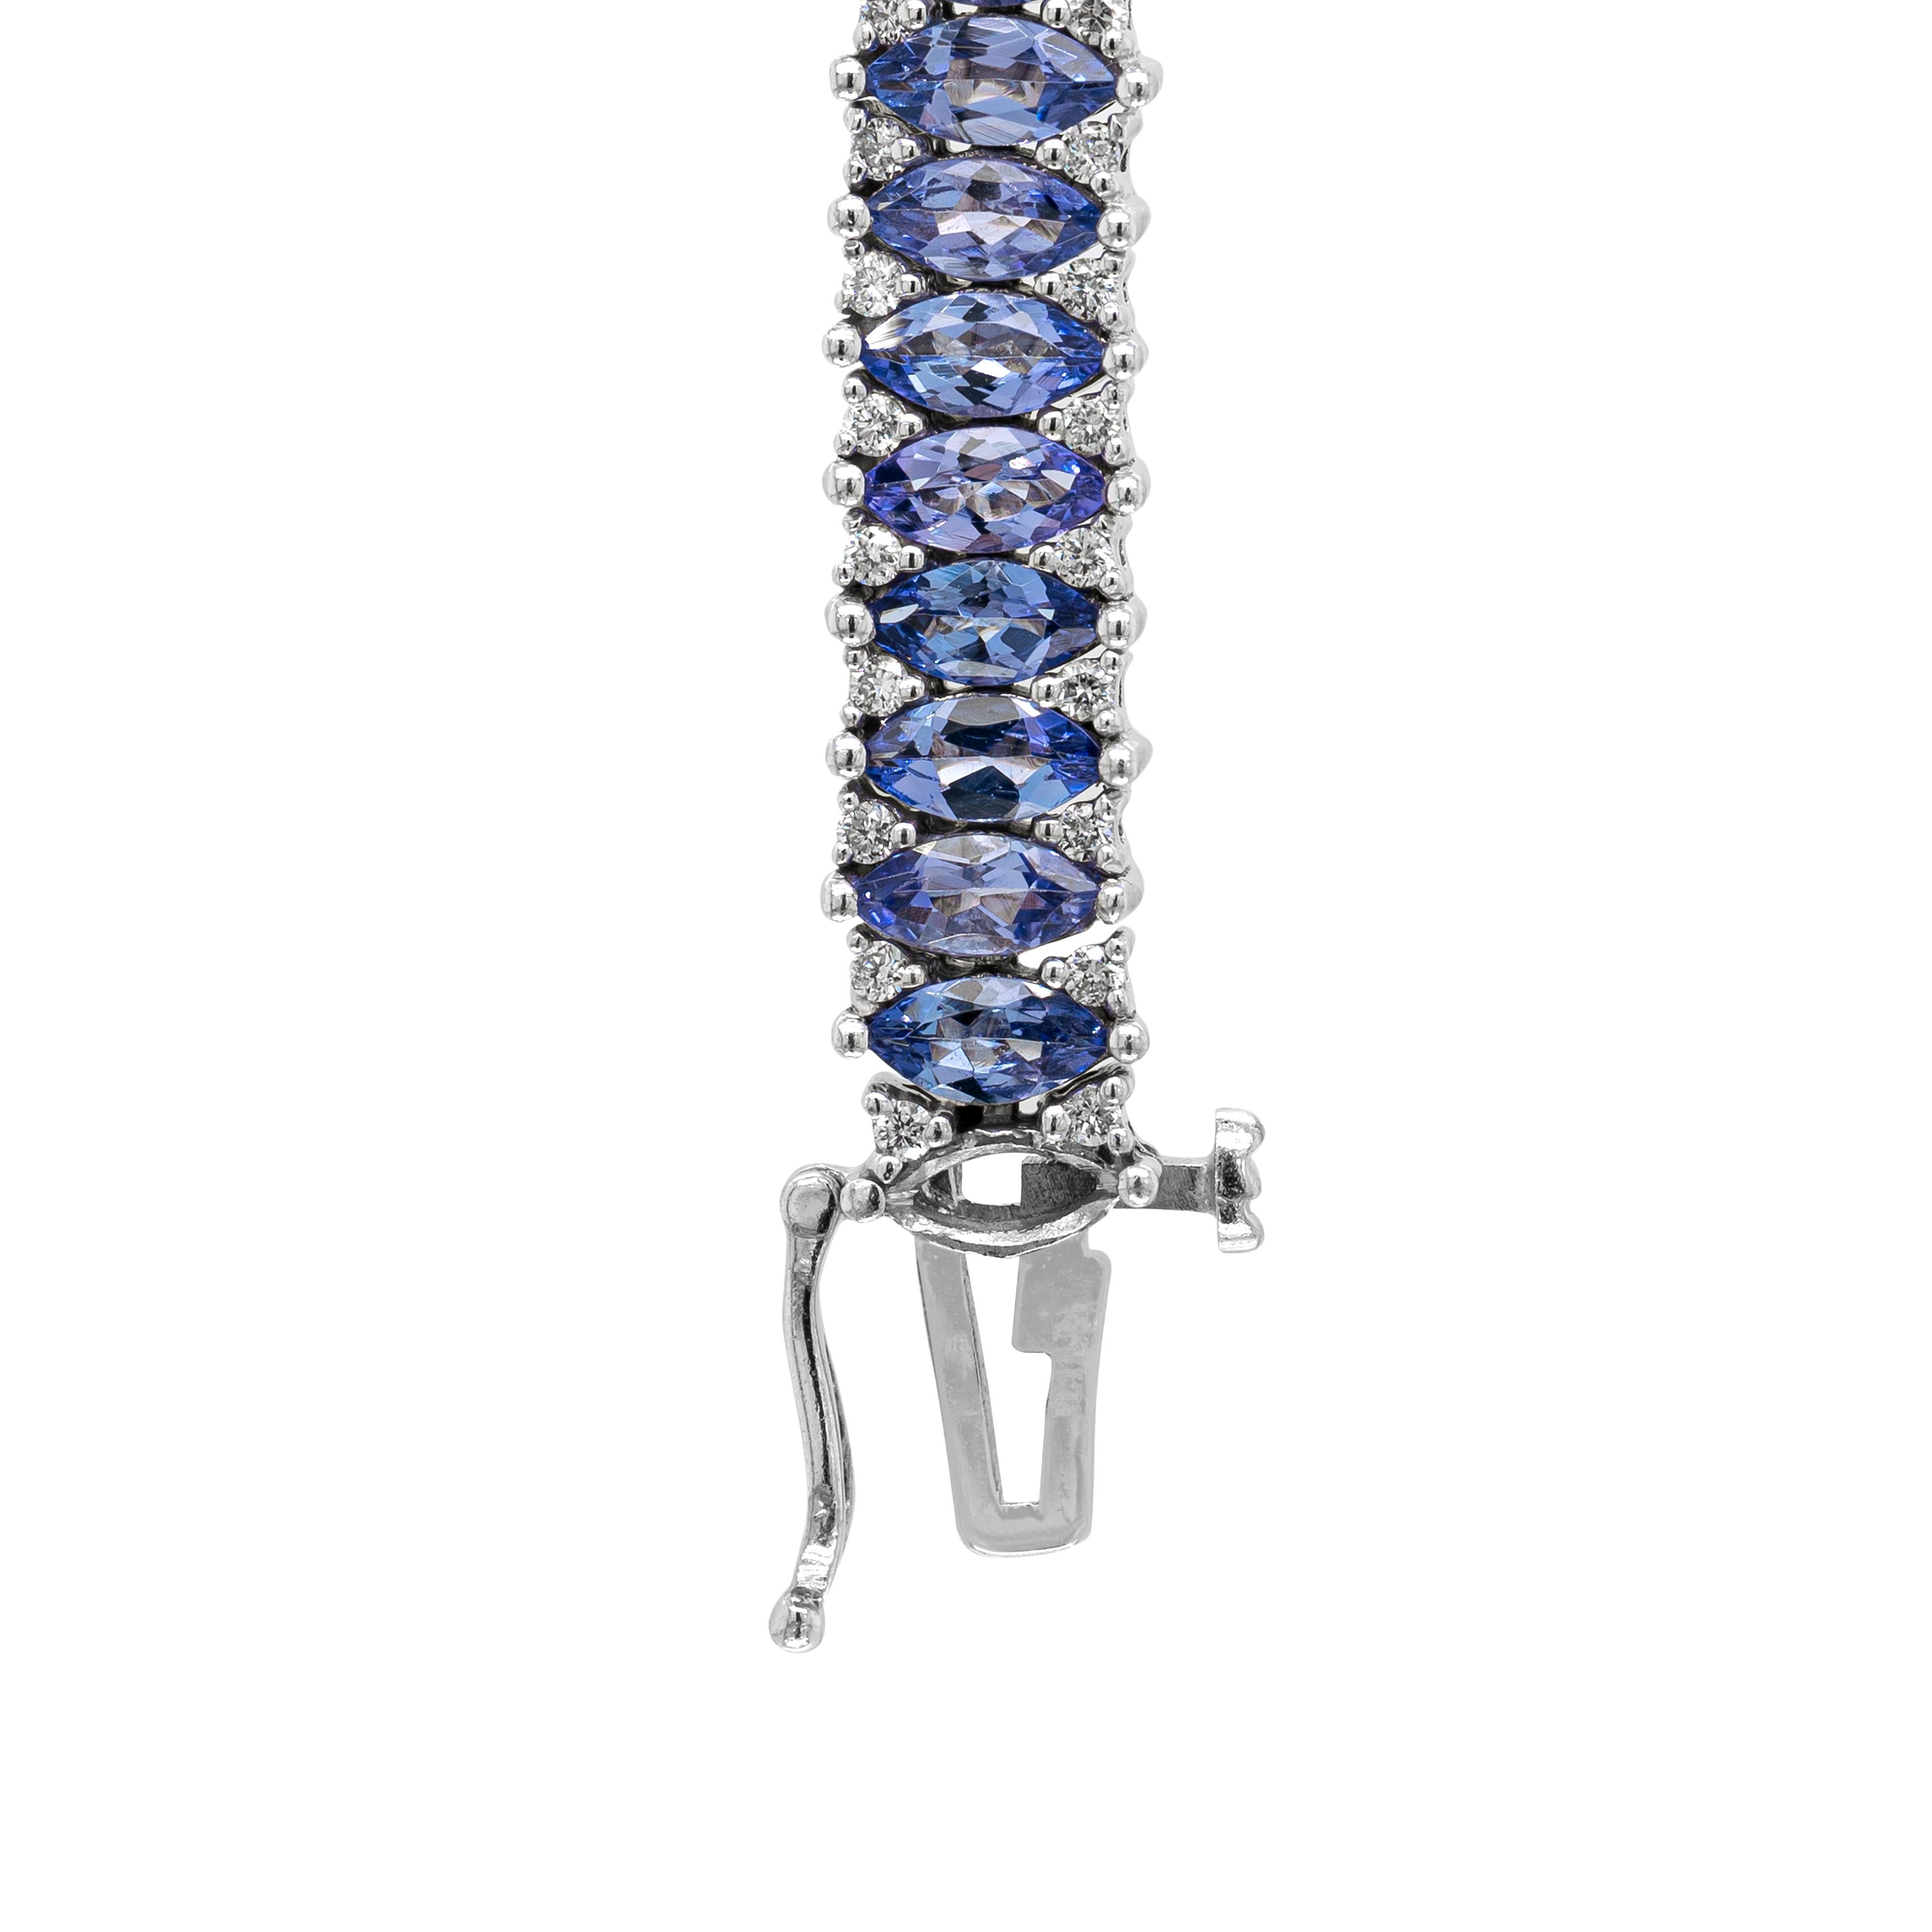 This stunning 18 carat white gold line bracelet is beautifully set with approximately 10.00 carats of marquise shaped tanzanite gemstones. The gorgeous violet blue stones are complemented by small round brilliant cut diamonds claw set between,